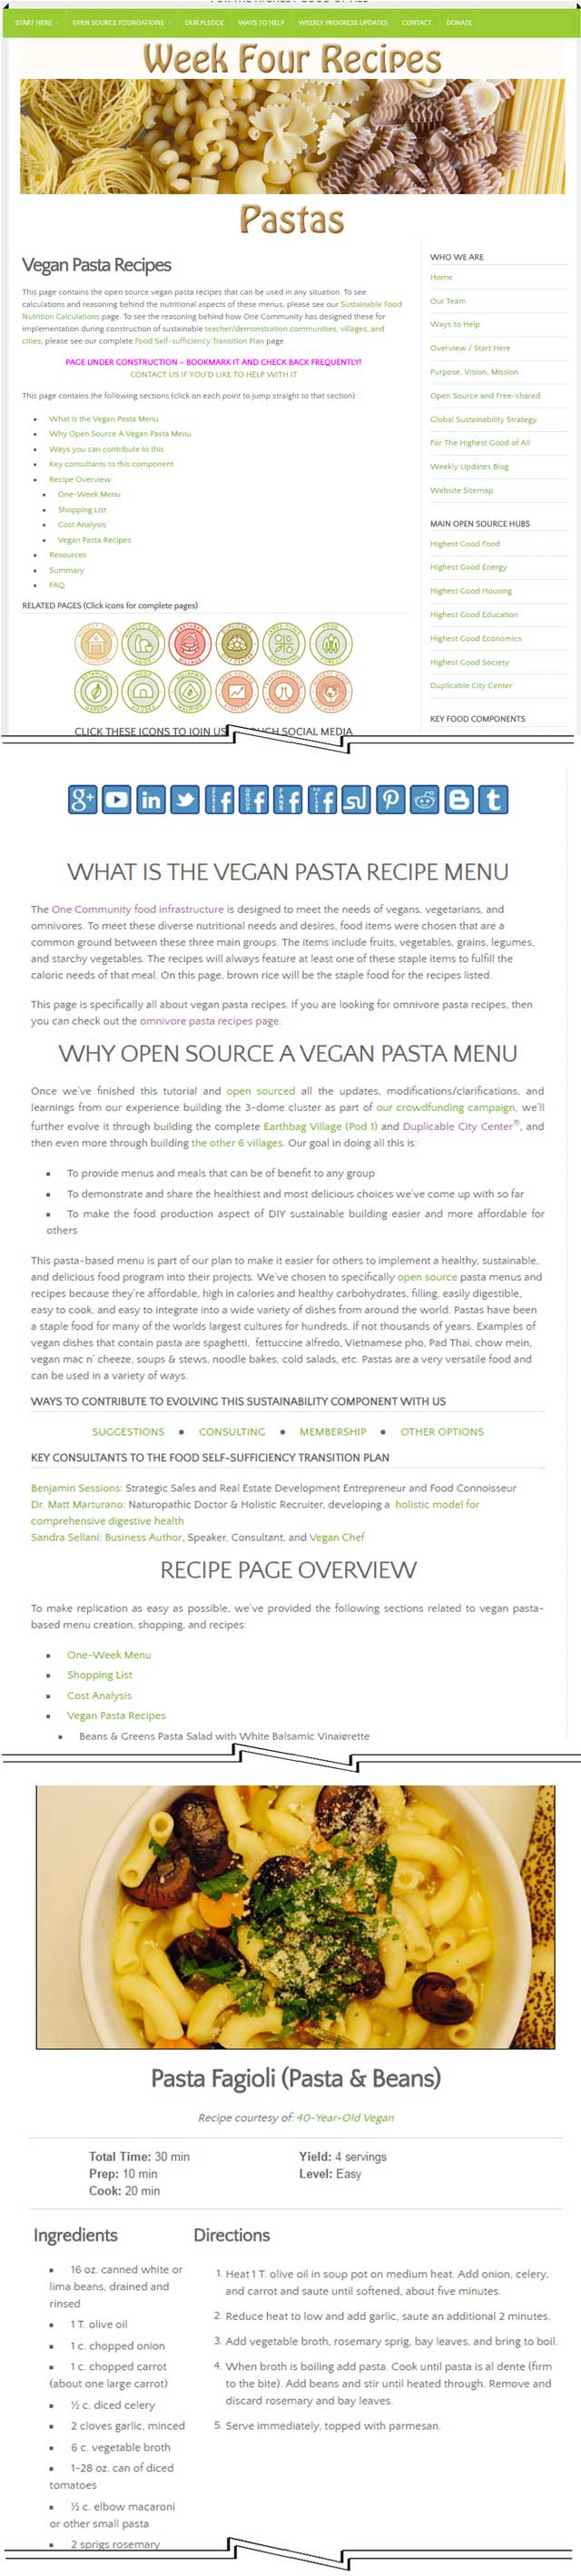 This week, the core team finished reformatting and adding sections to the Vegan Pasta Recipes & Omnivore Pasta Recipes pages, bringing both of the pages to 100% completion. You can see a sample of that work here, on the vegan pasta recipe page: